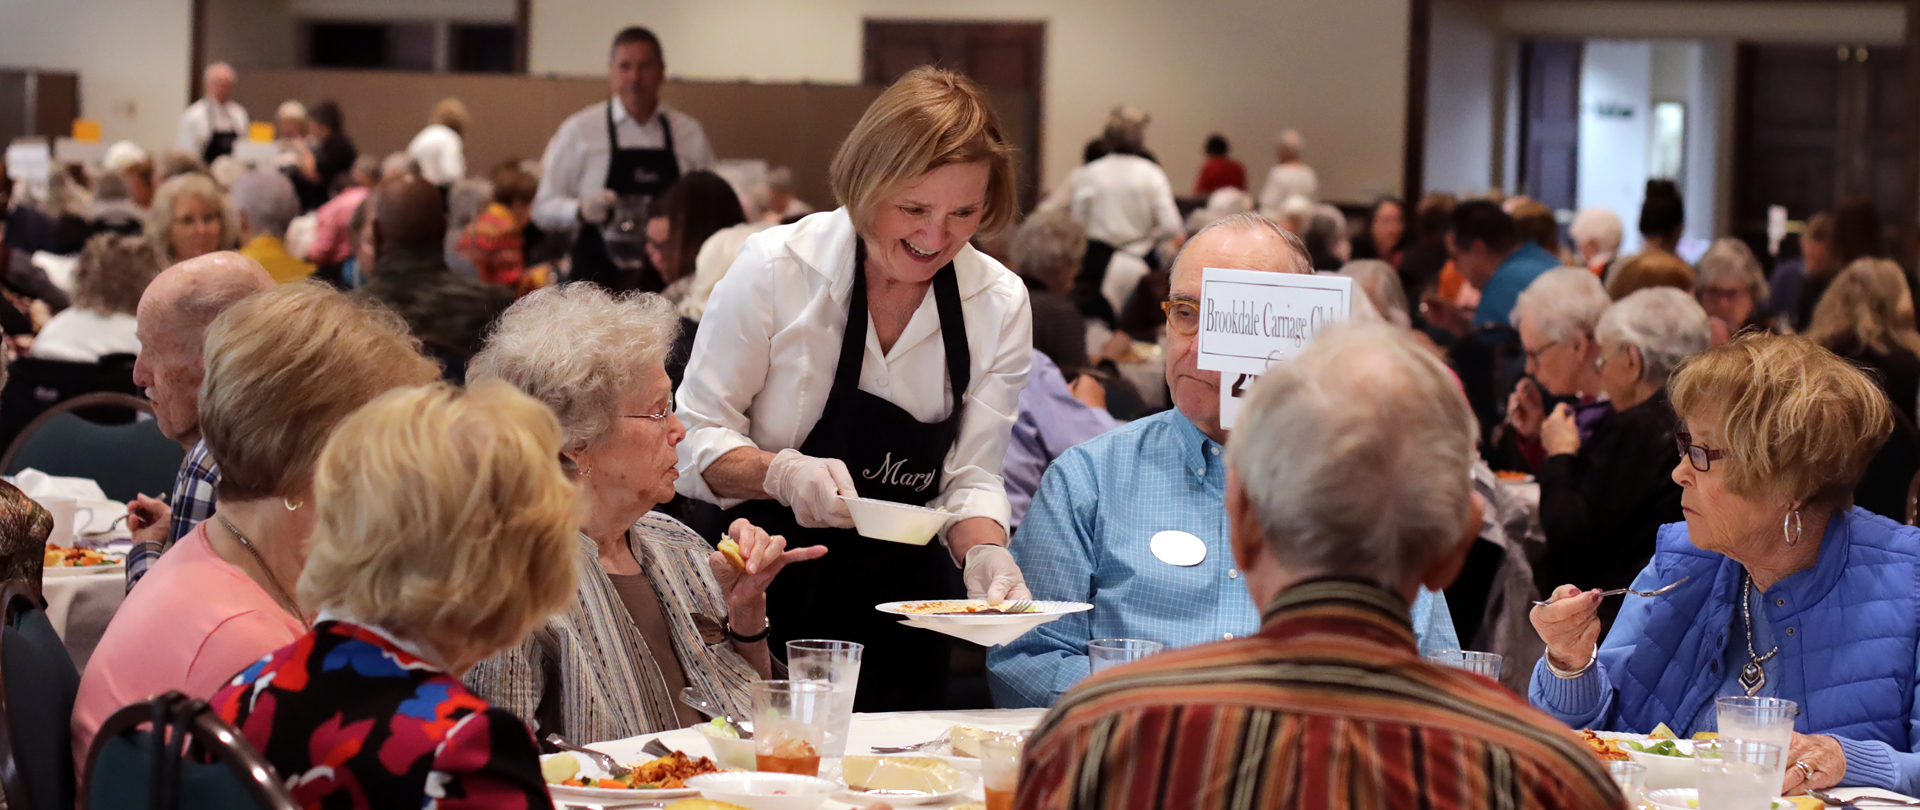 Senior Adult Luncheon
Thursday, February 23
12:00–1:30 PM, Crown Room
 
